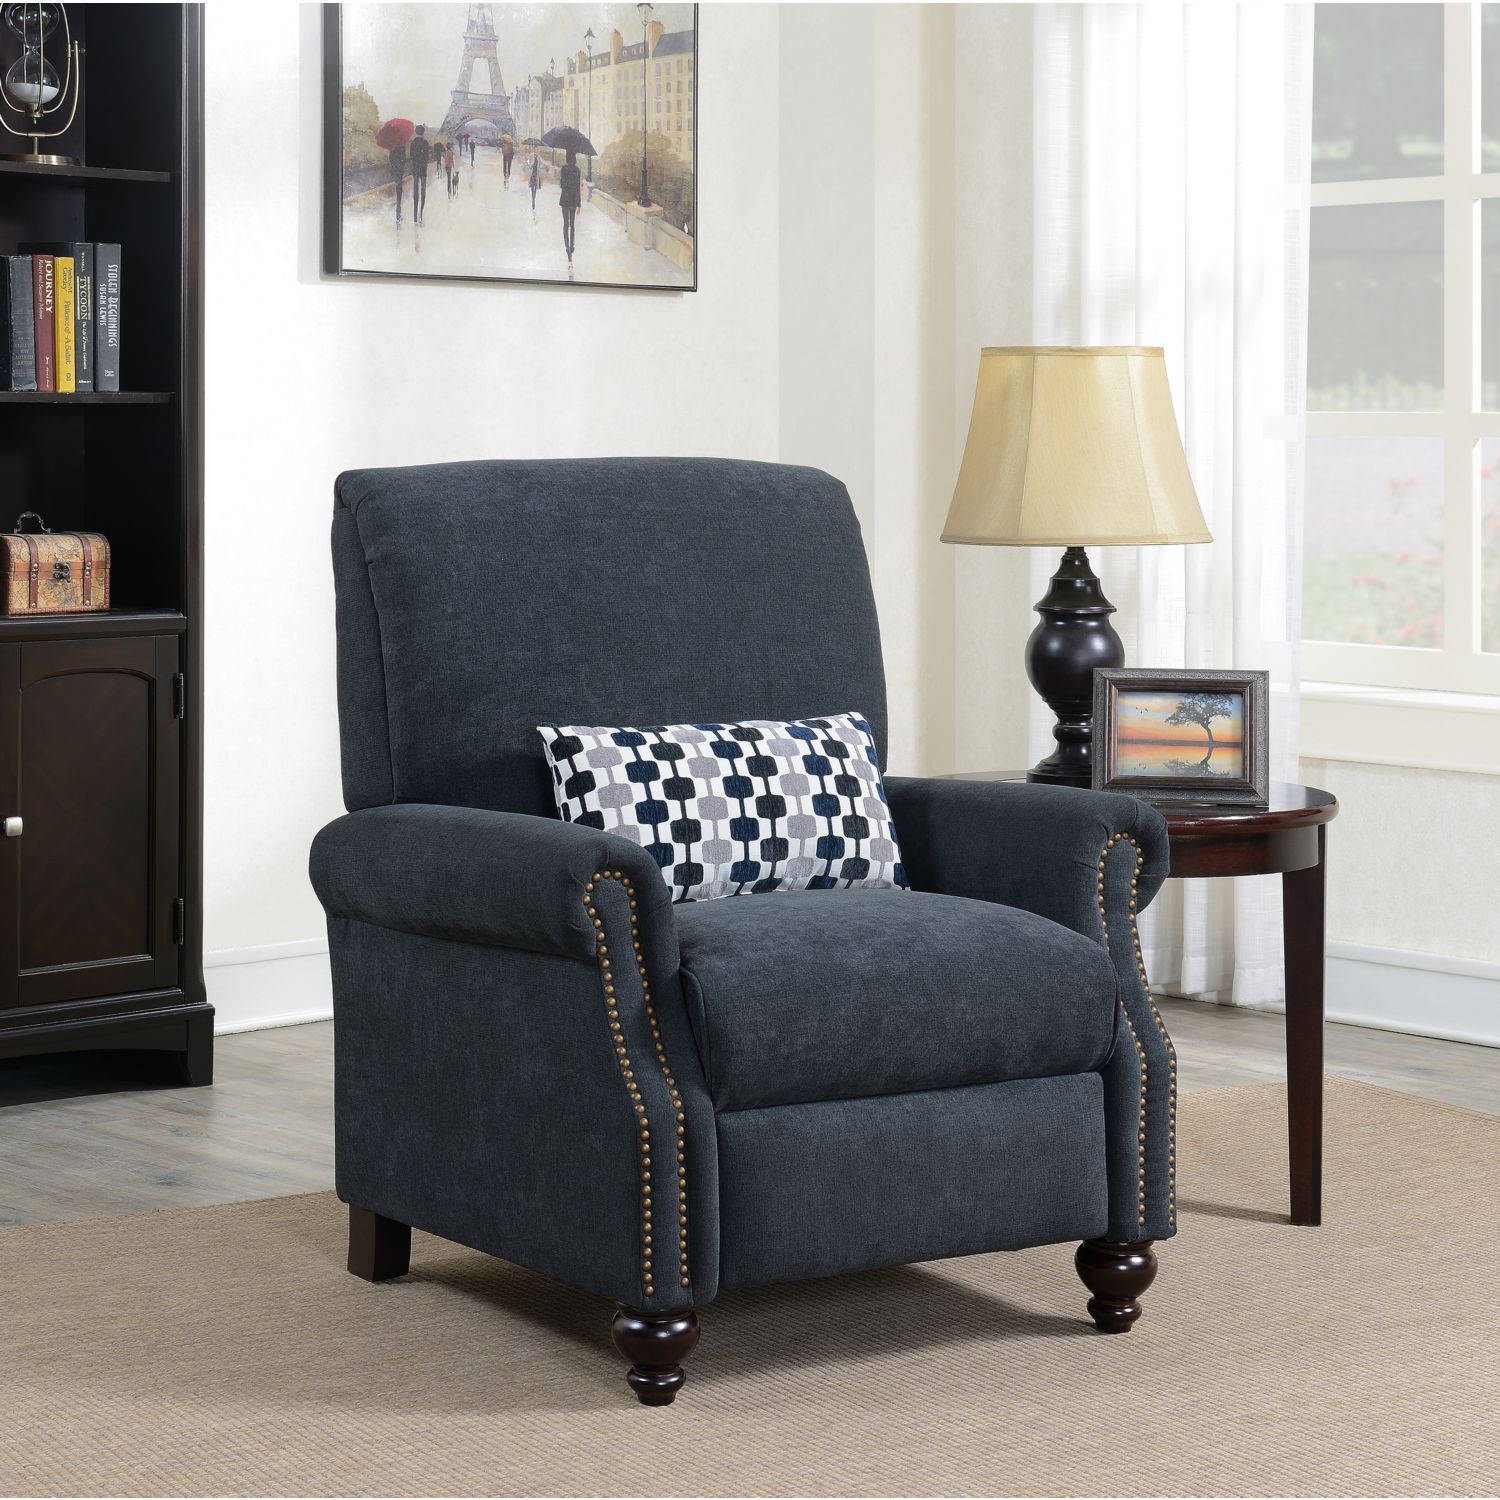 Conroe High Leg Recliner with Kidney Accent Pillow